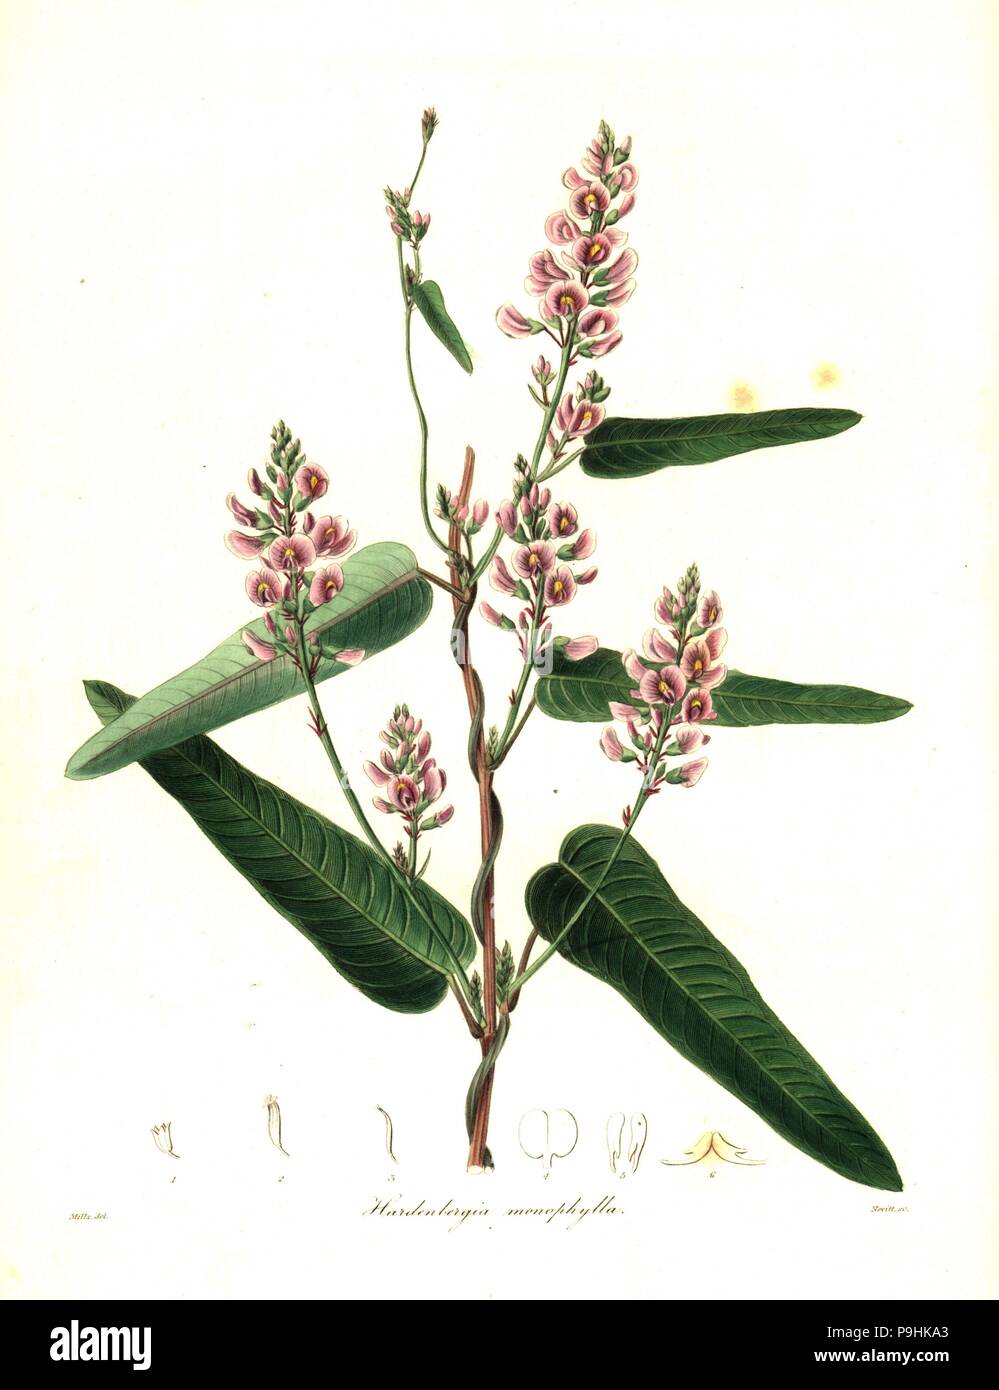 Vine lilac or waraburra, Hardenbergia violacea (One-leaved hardenbergia, Hardenbergia monophylla). Handcoloured copperplate engraving by S. Nevitt after a botanical illustration by Mills rom Benjamin Maund and the Rev. John Stevens Henslow's The Botanist, London, 1836. Stock Photo